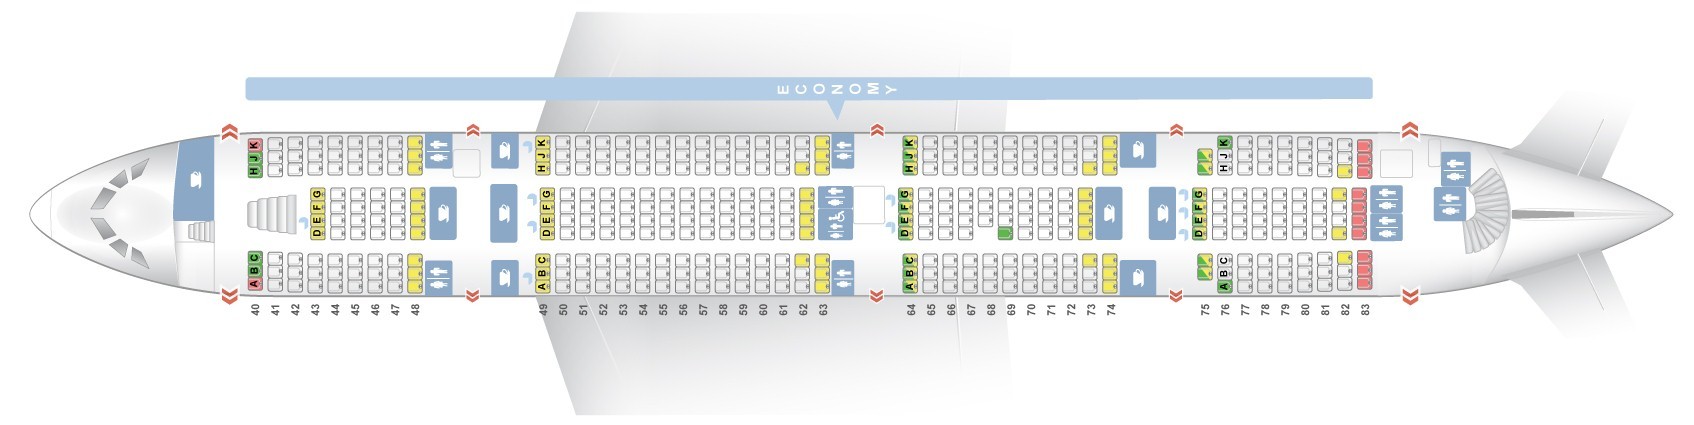 Seat Map Airbus A Etihad Airways Best Seats In The Plane